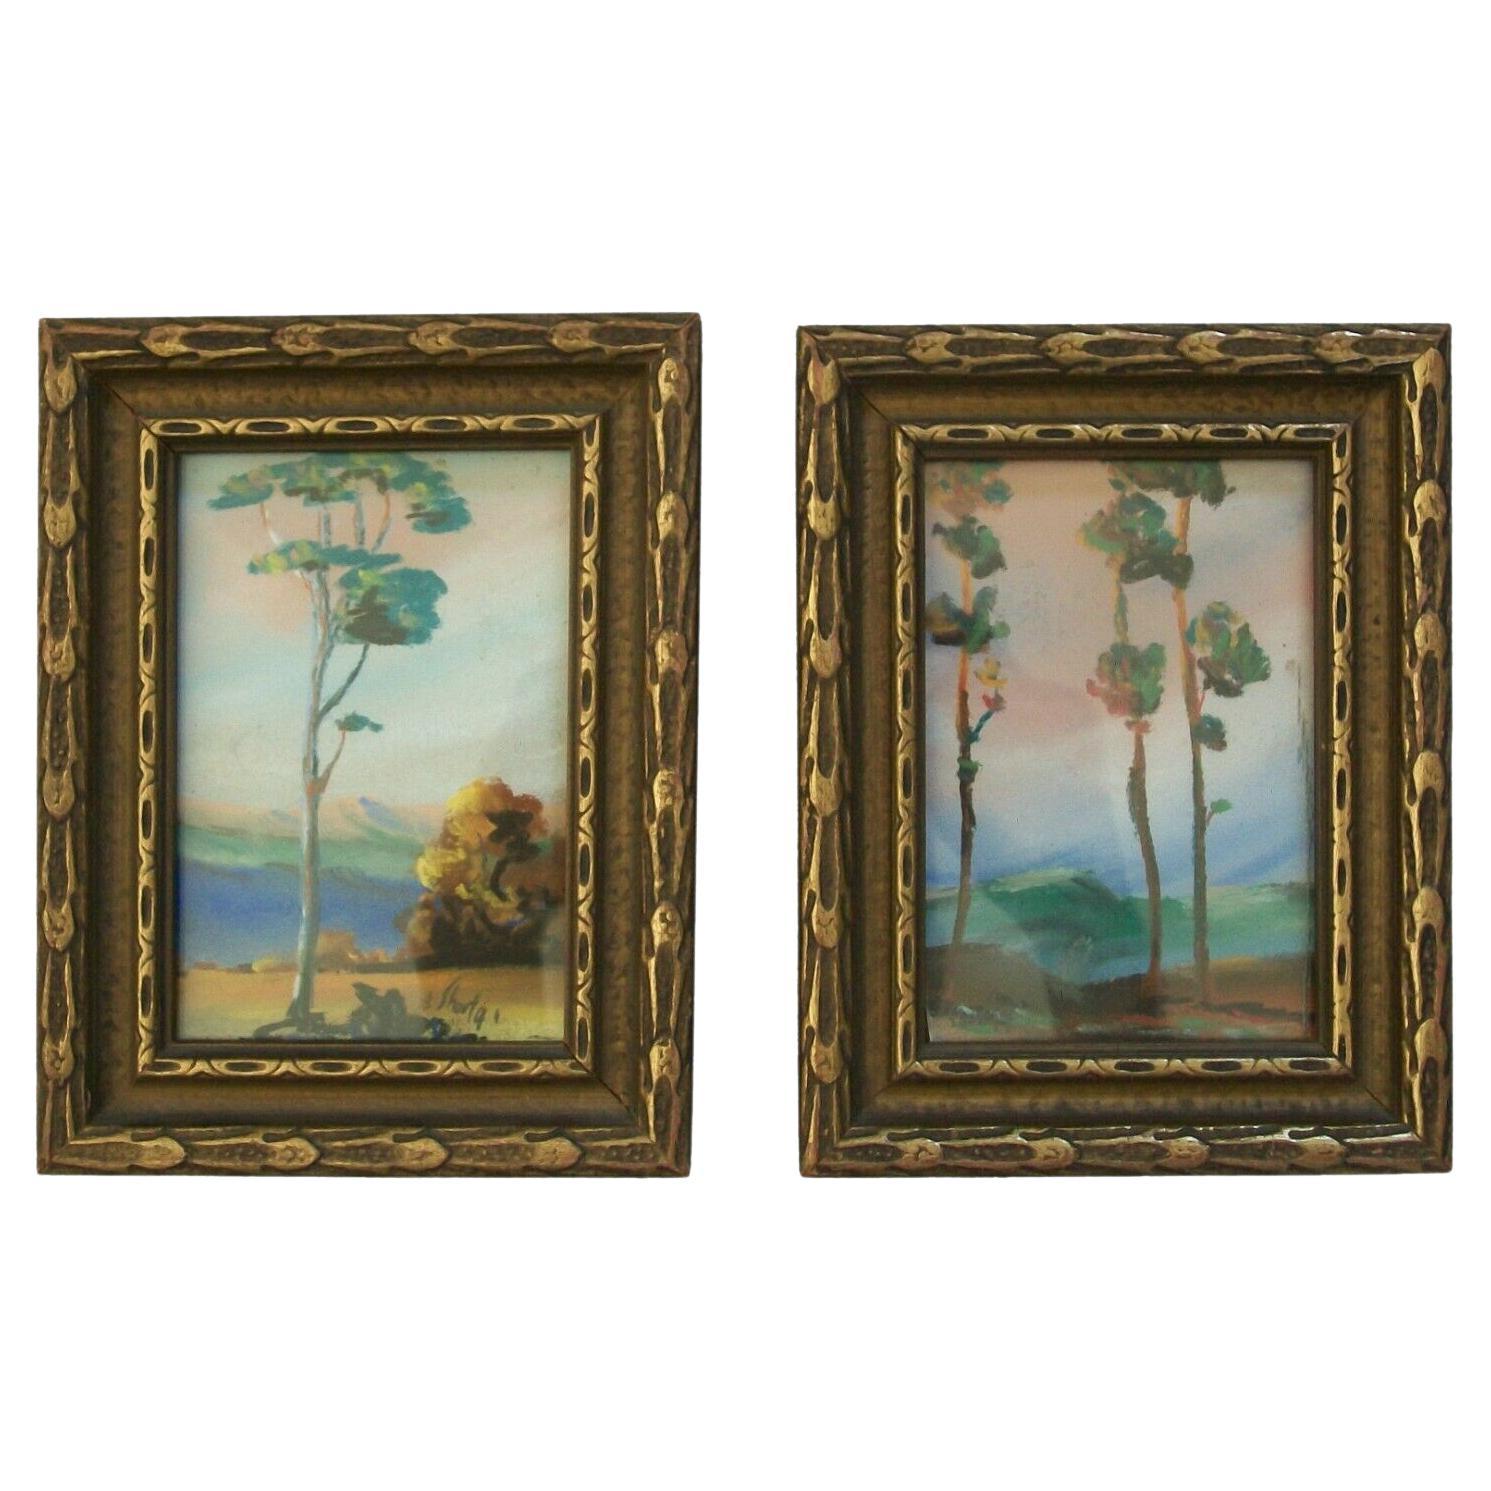 Miniature Pair of American Impressionist Framed Landscape Paintings, Circa 1900 For Sale